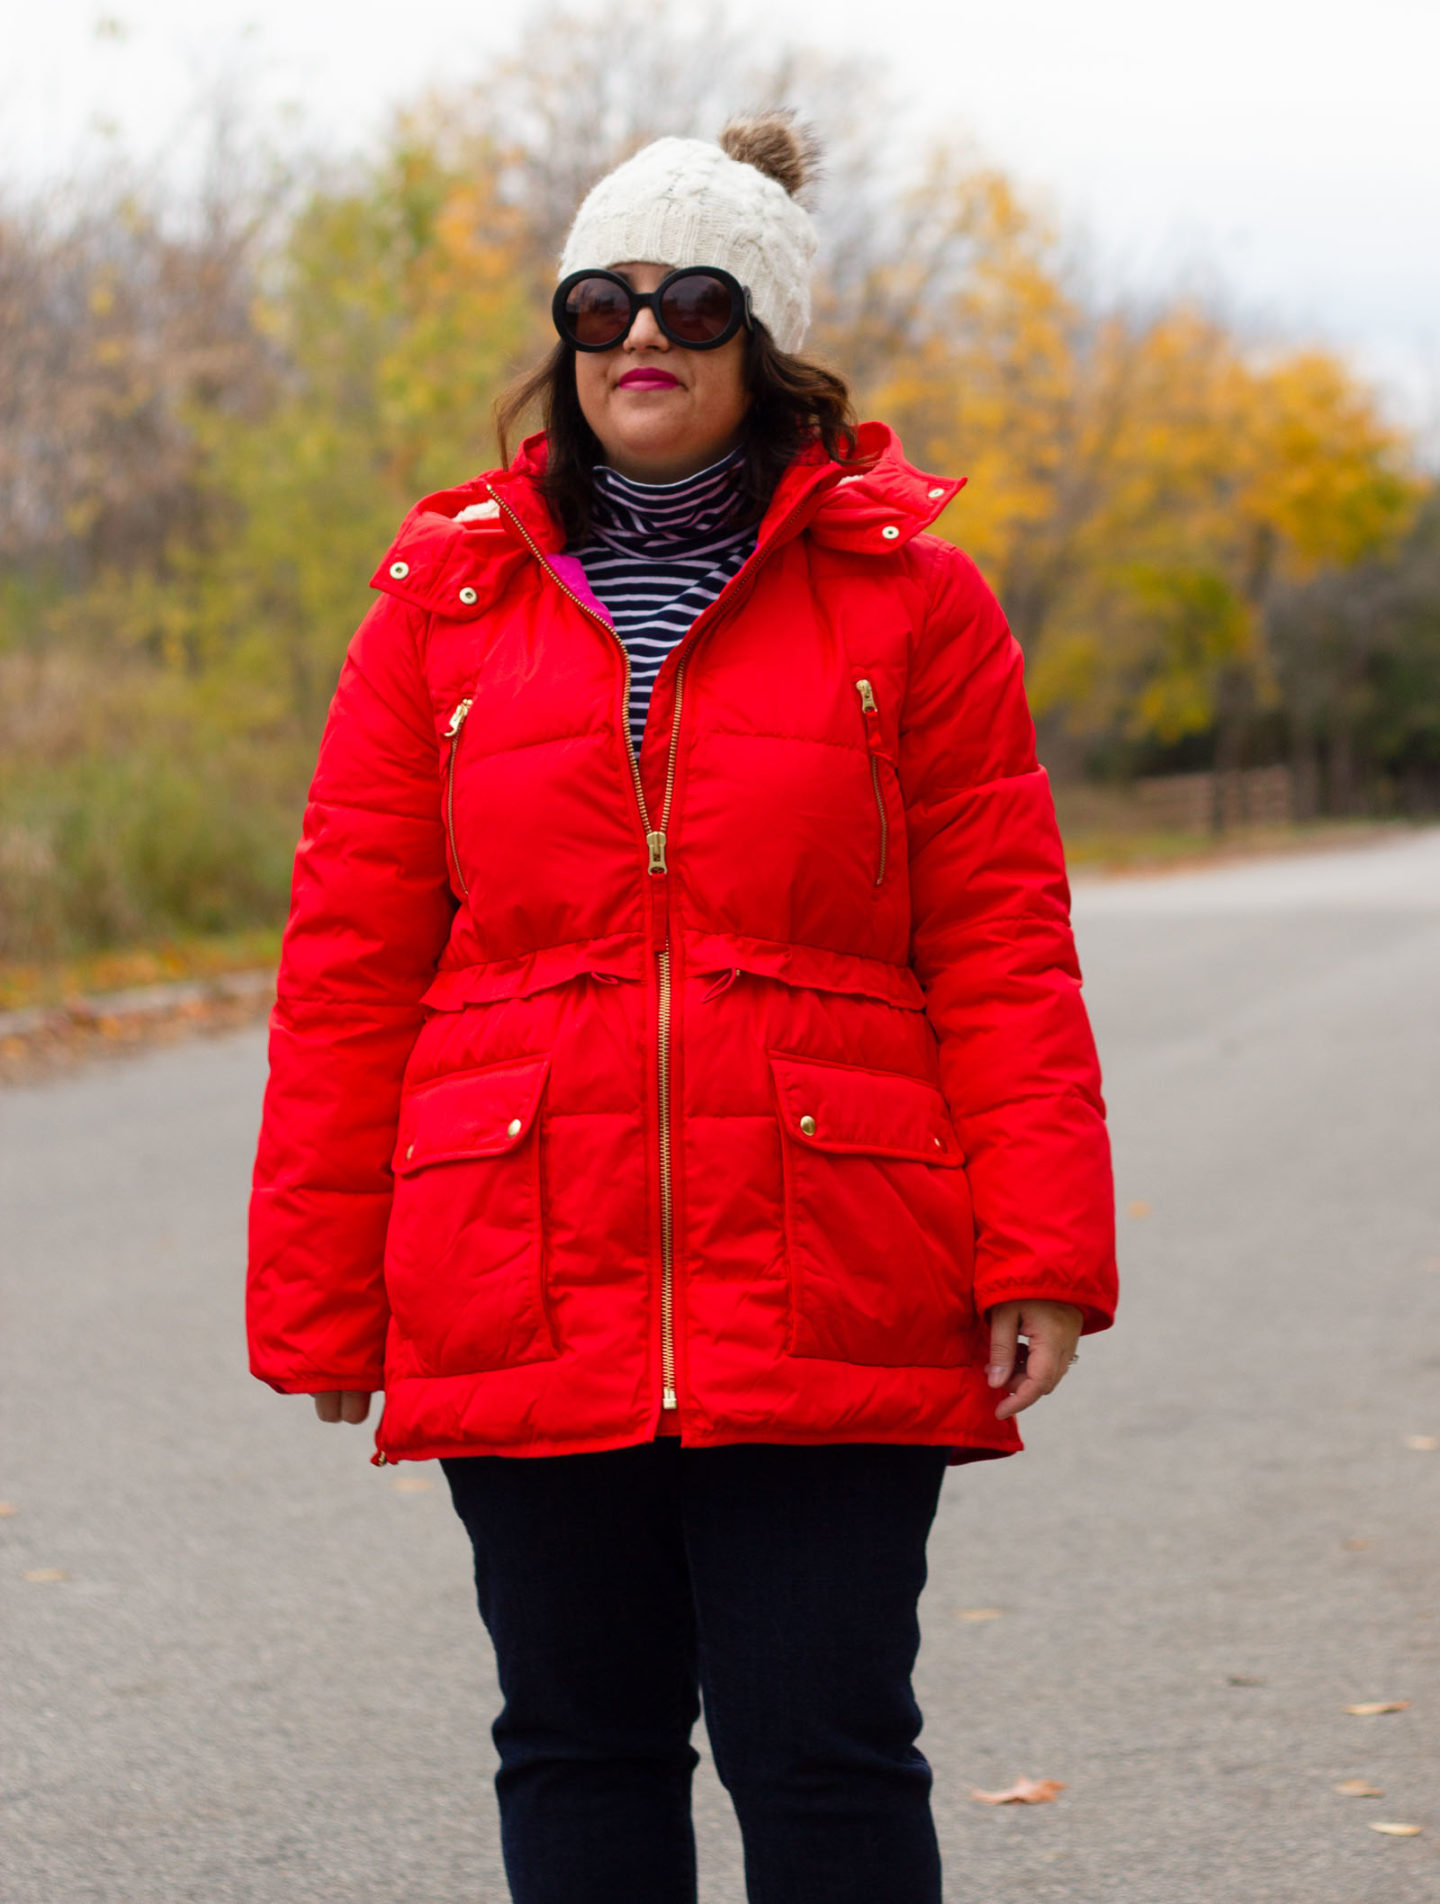 JCREW chateau puffer review